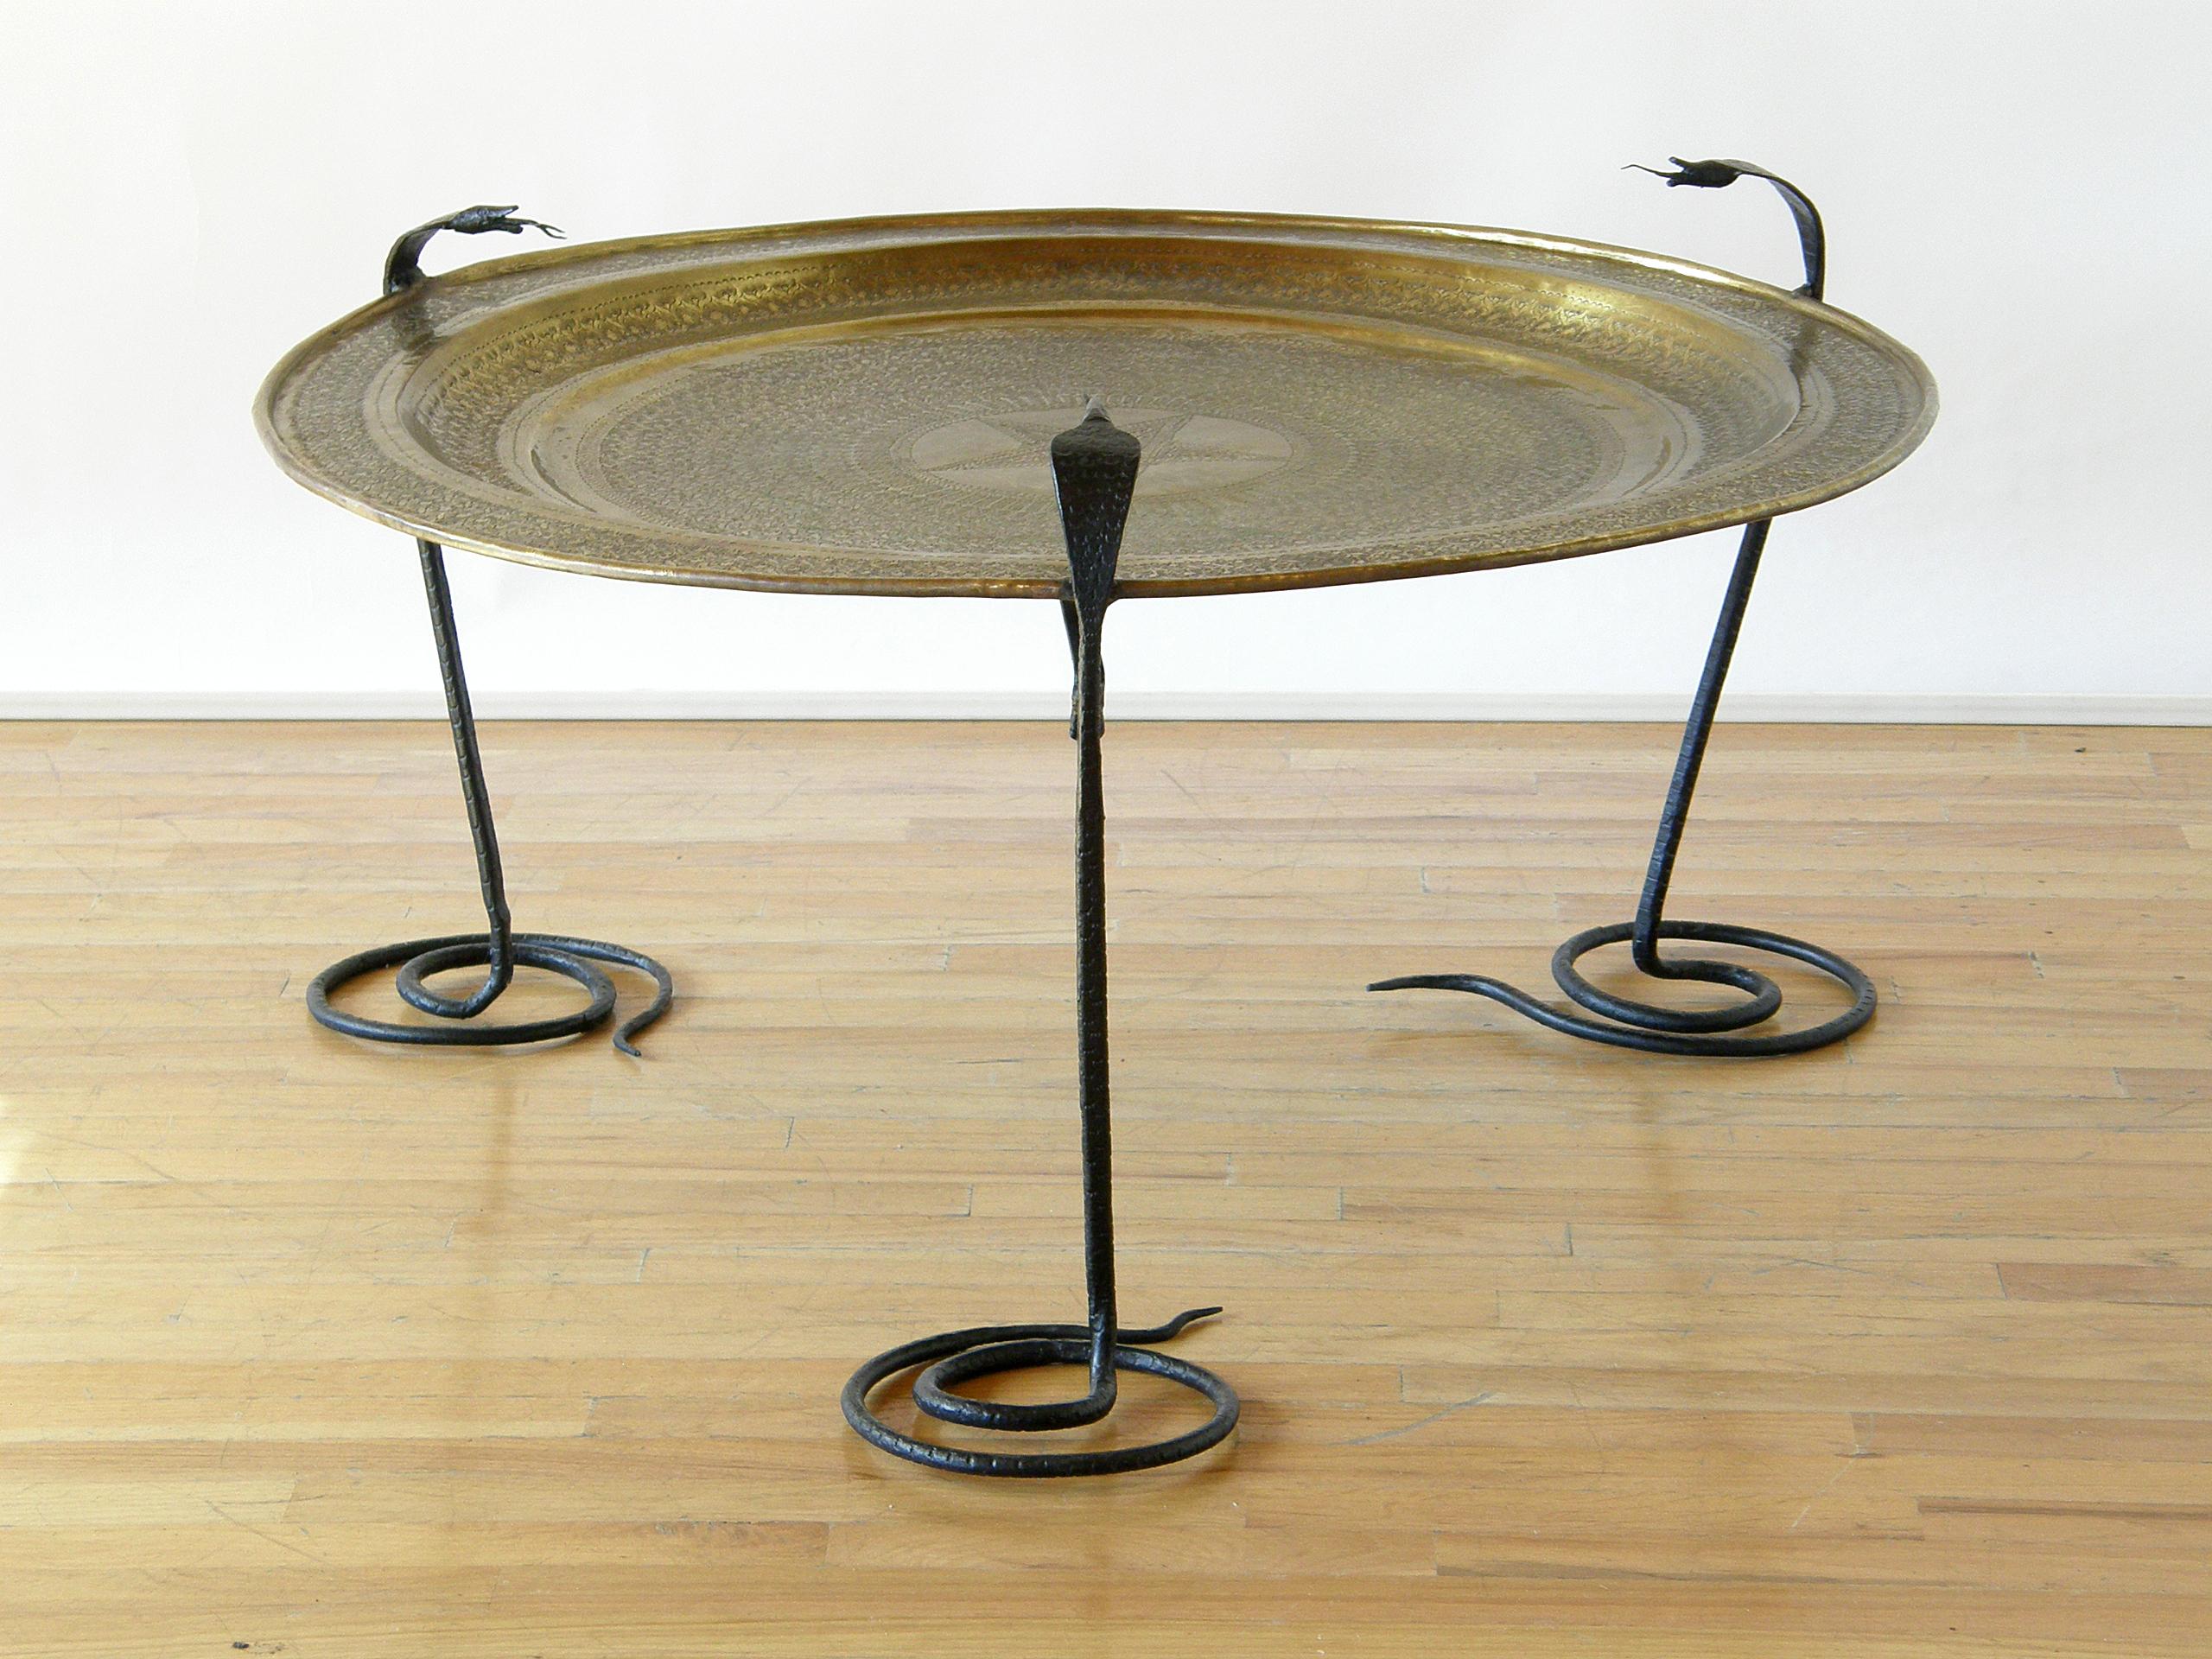 This unique table has handwrought iron serpents for legs. Their coiled tails form their bases, then their heads rise up above the surface of the table. Their necks flare like Egyptian cobras, and their forked tongues flicker from their open mouths.